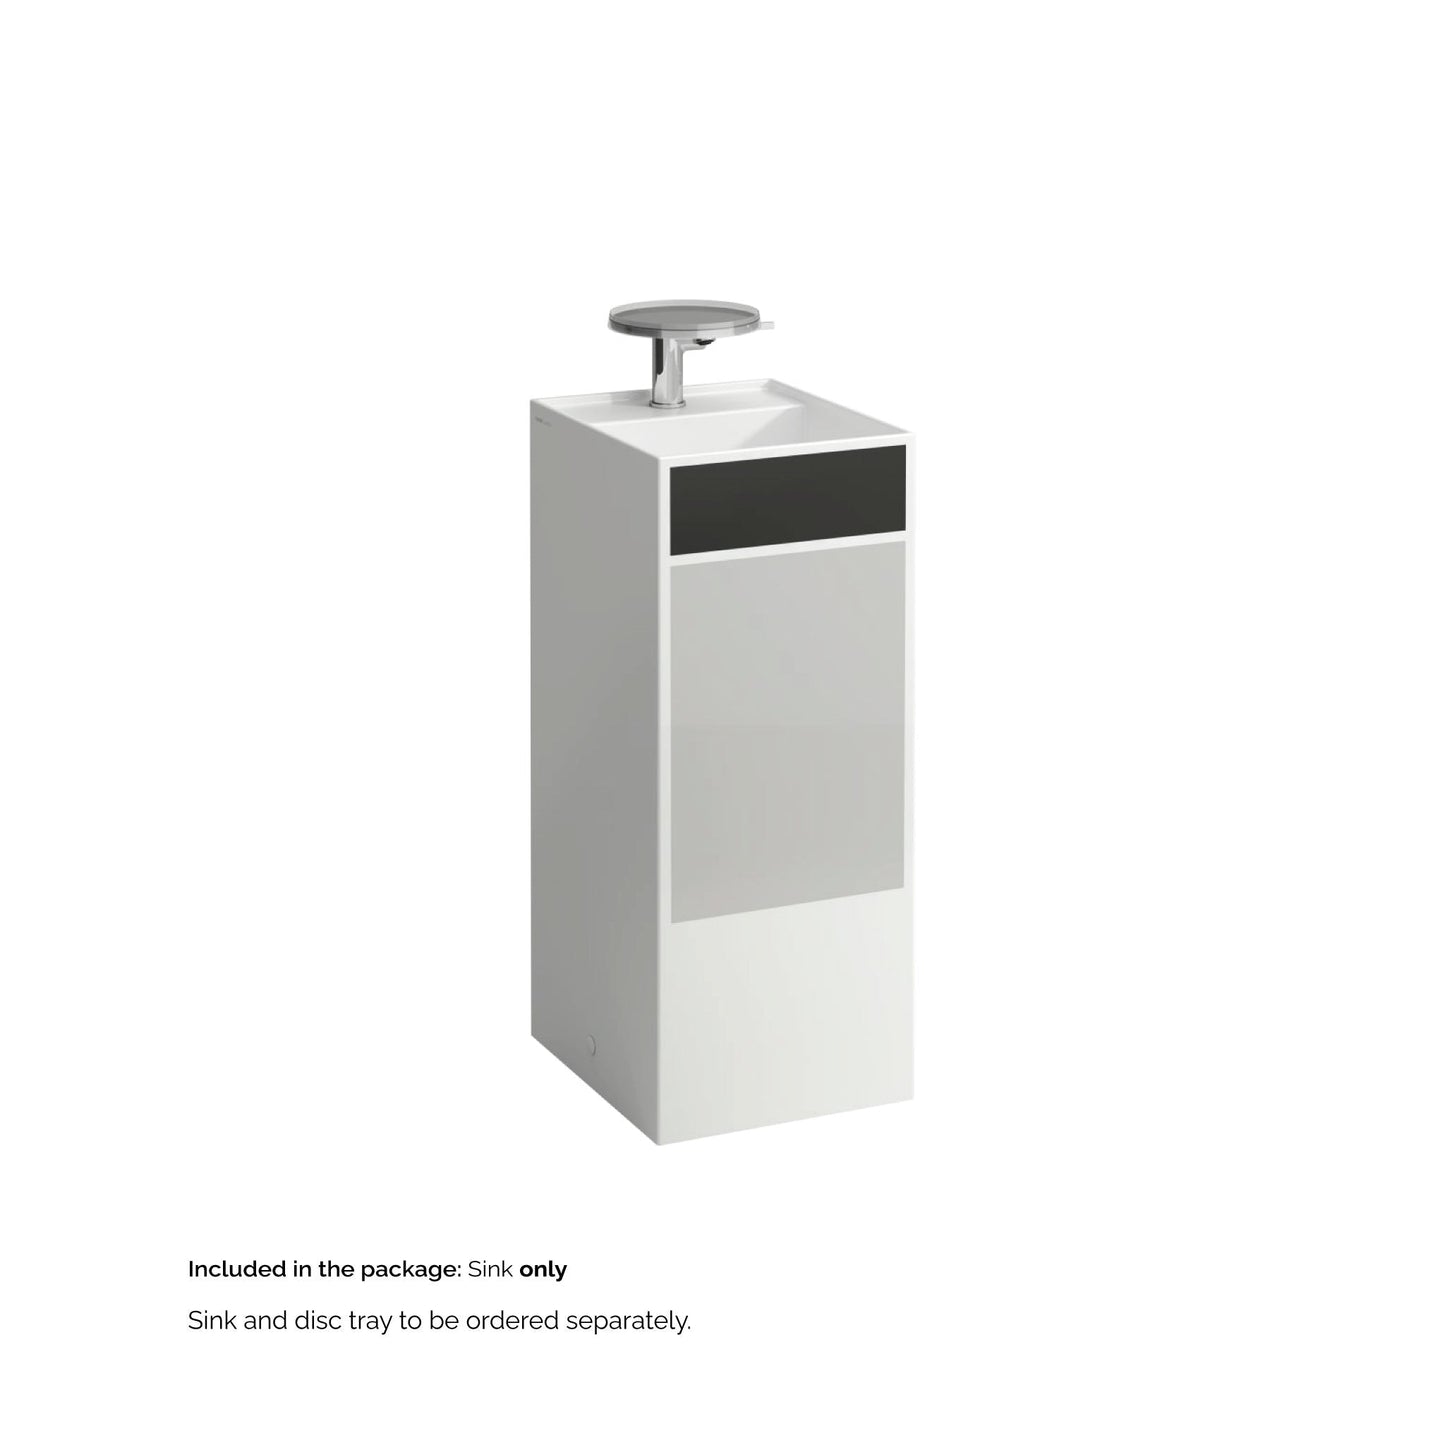 Laufen Kartell 15" x 17" x 35" Black and Gray Surface Freestanding Bathroom Sink With Faucet Hole